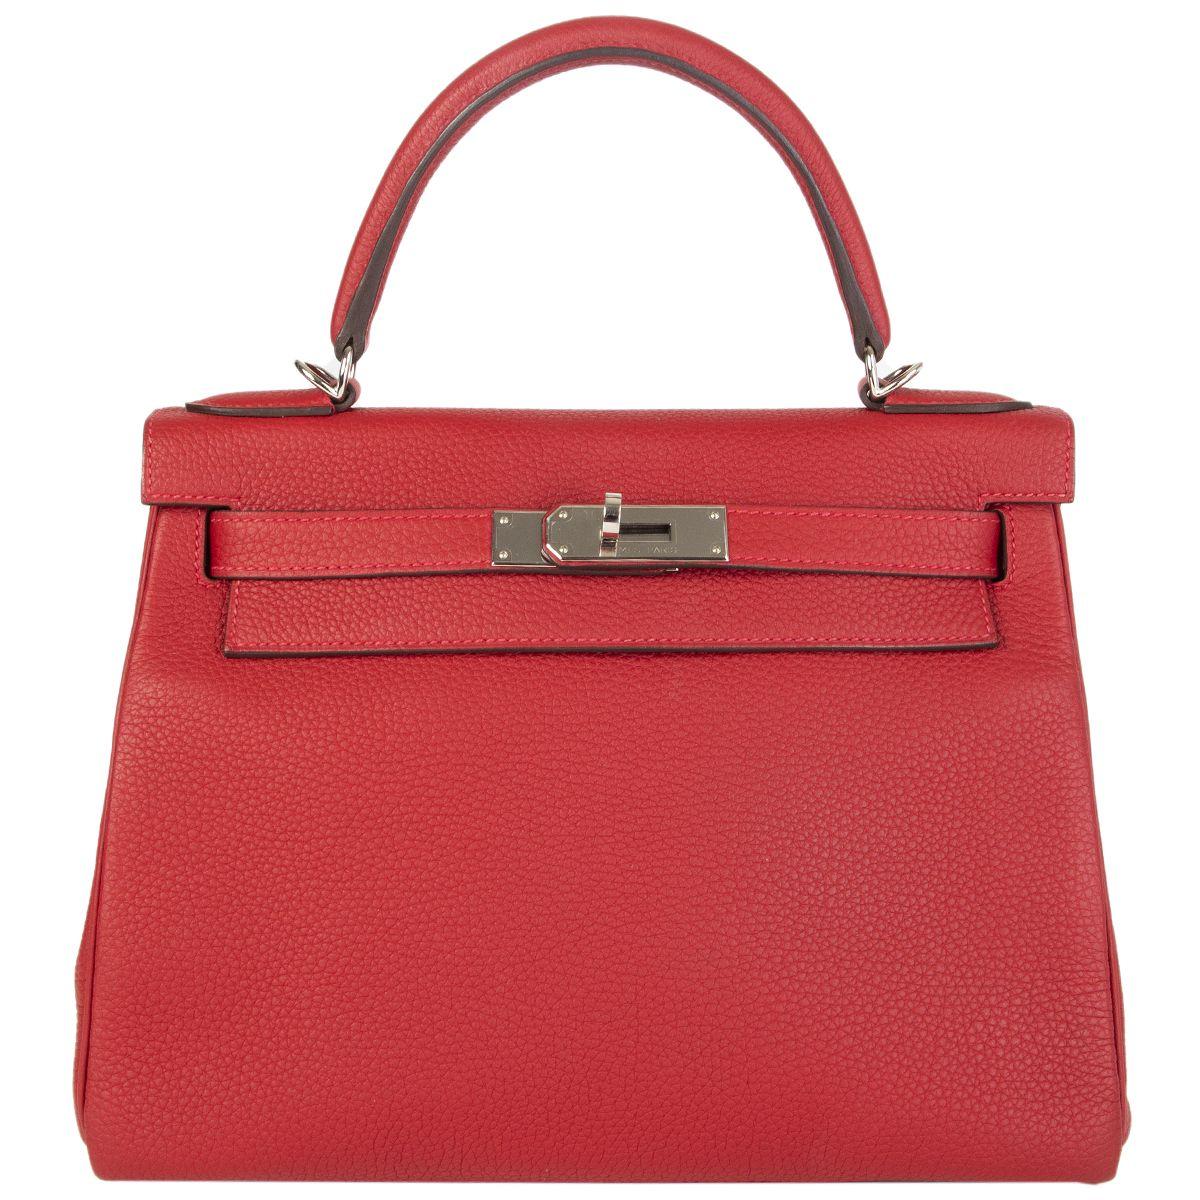 Hermès 'Kelly II 28' bag in Rouge Garance Veau Togo leather with palladium hardware. The interior is lined in Chevre (goat skin) with a divided open pocket against the front and a zipper pocket against the back. Has been carried and is in virtually